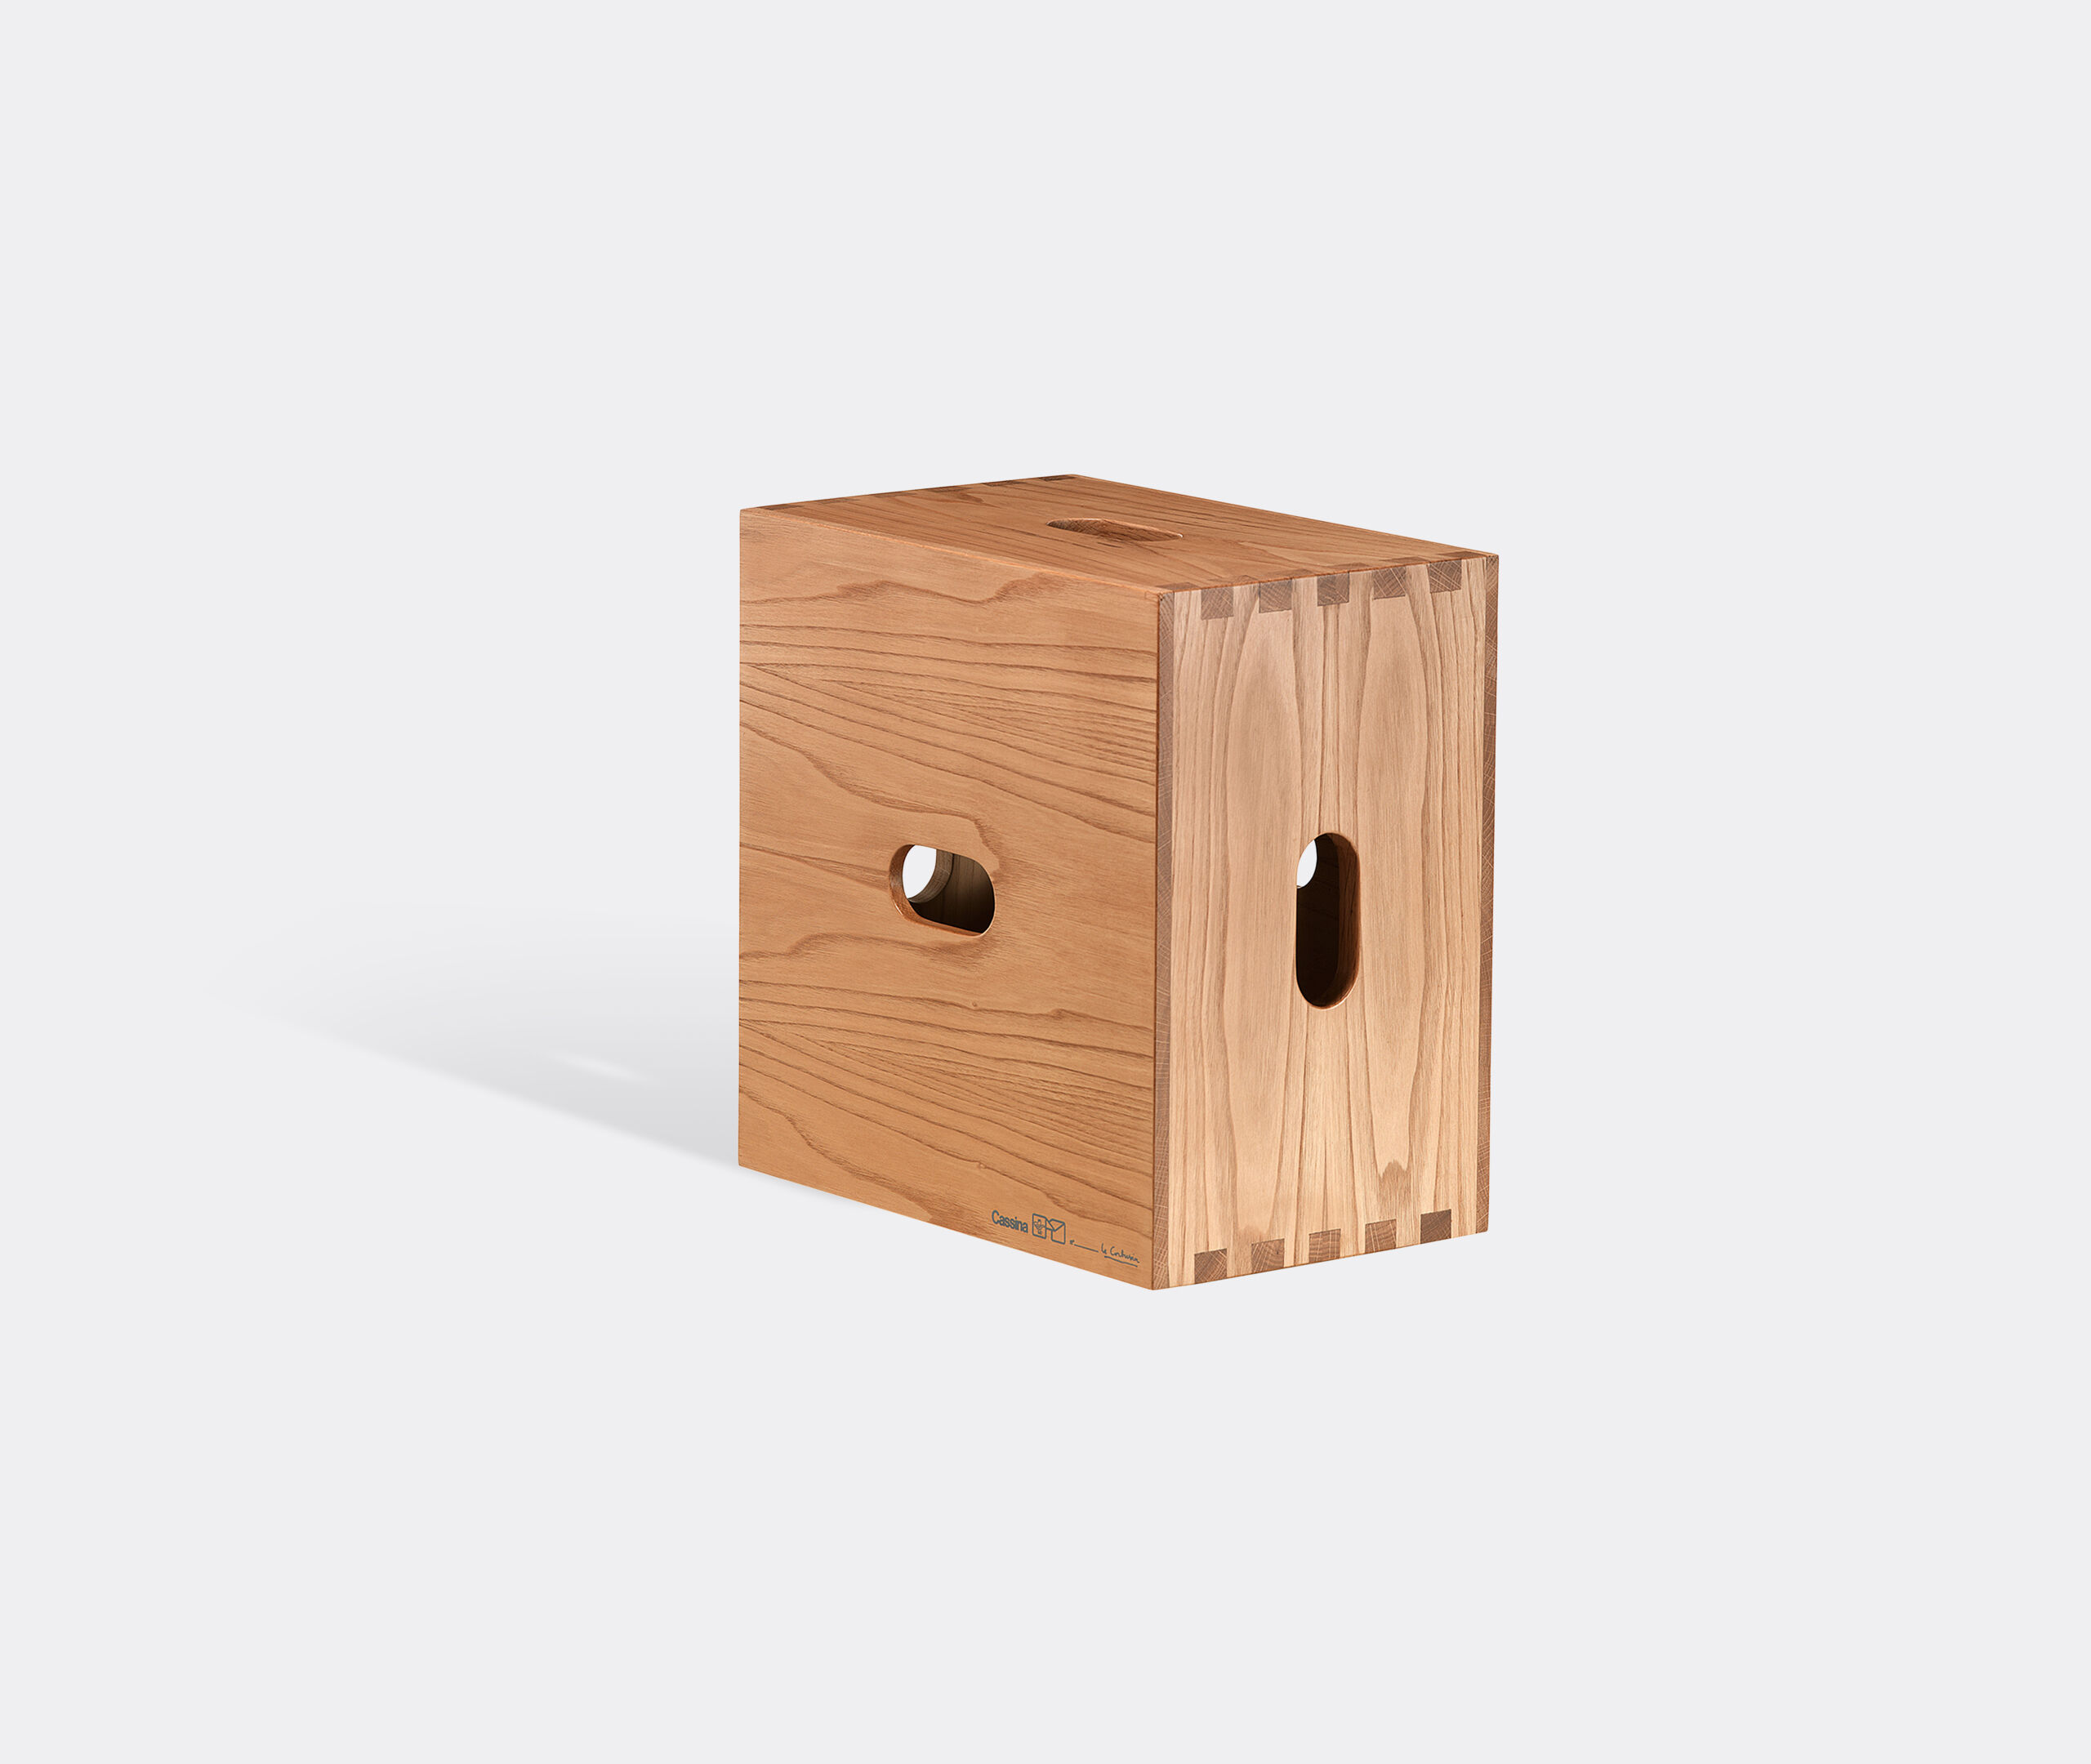 LC14 - Tabouret Cabanon', stool in chestnut wood by Cassina 